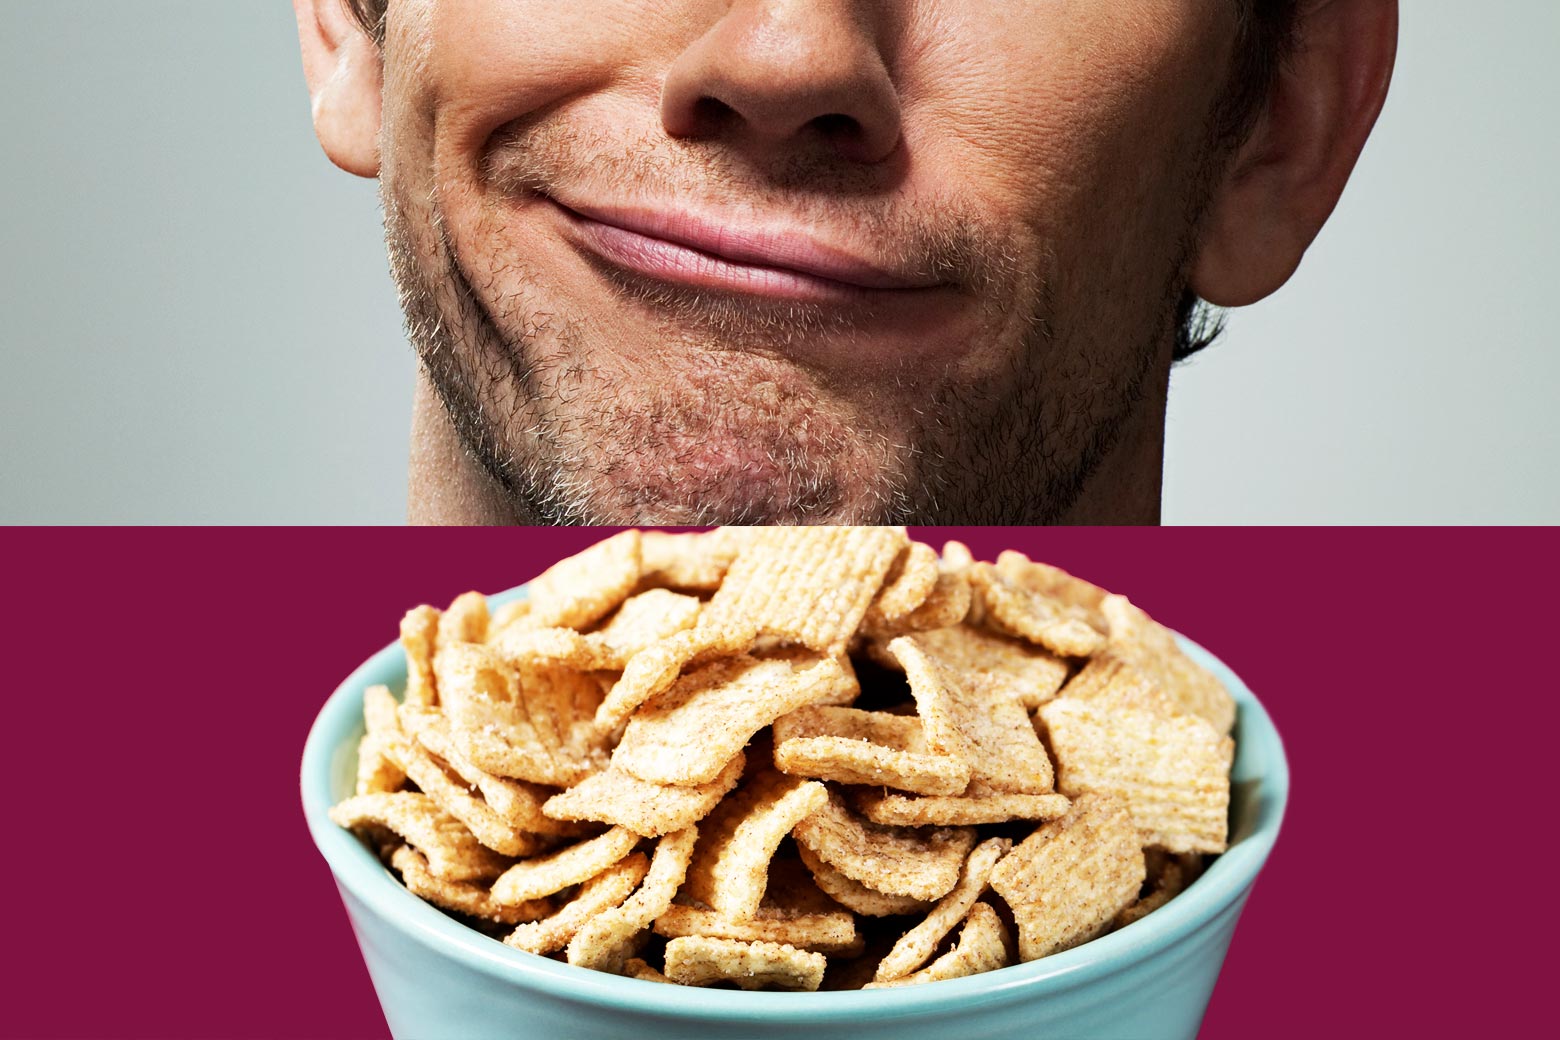 Top: a guy's mouth looking skeptical. Bottom: a bowl of cereal.